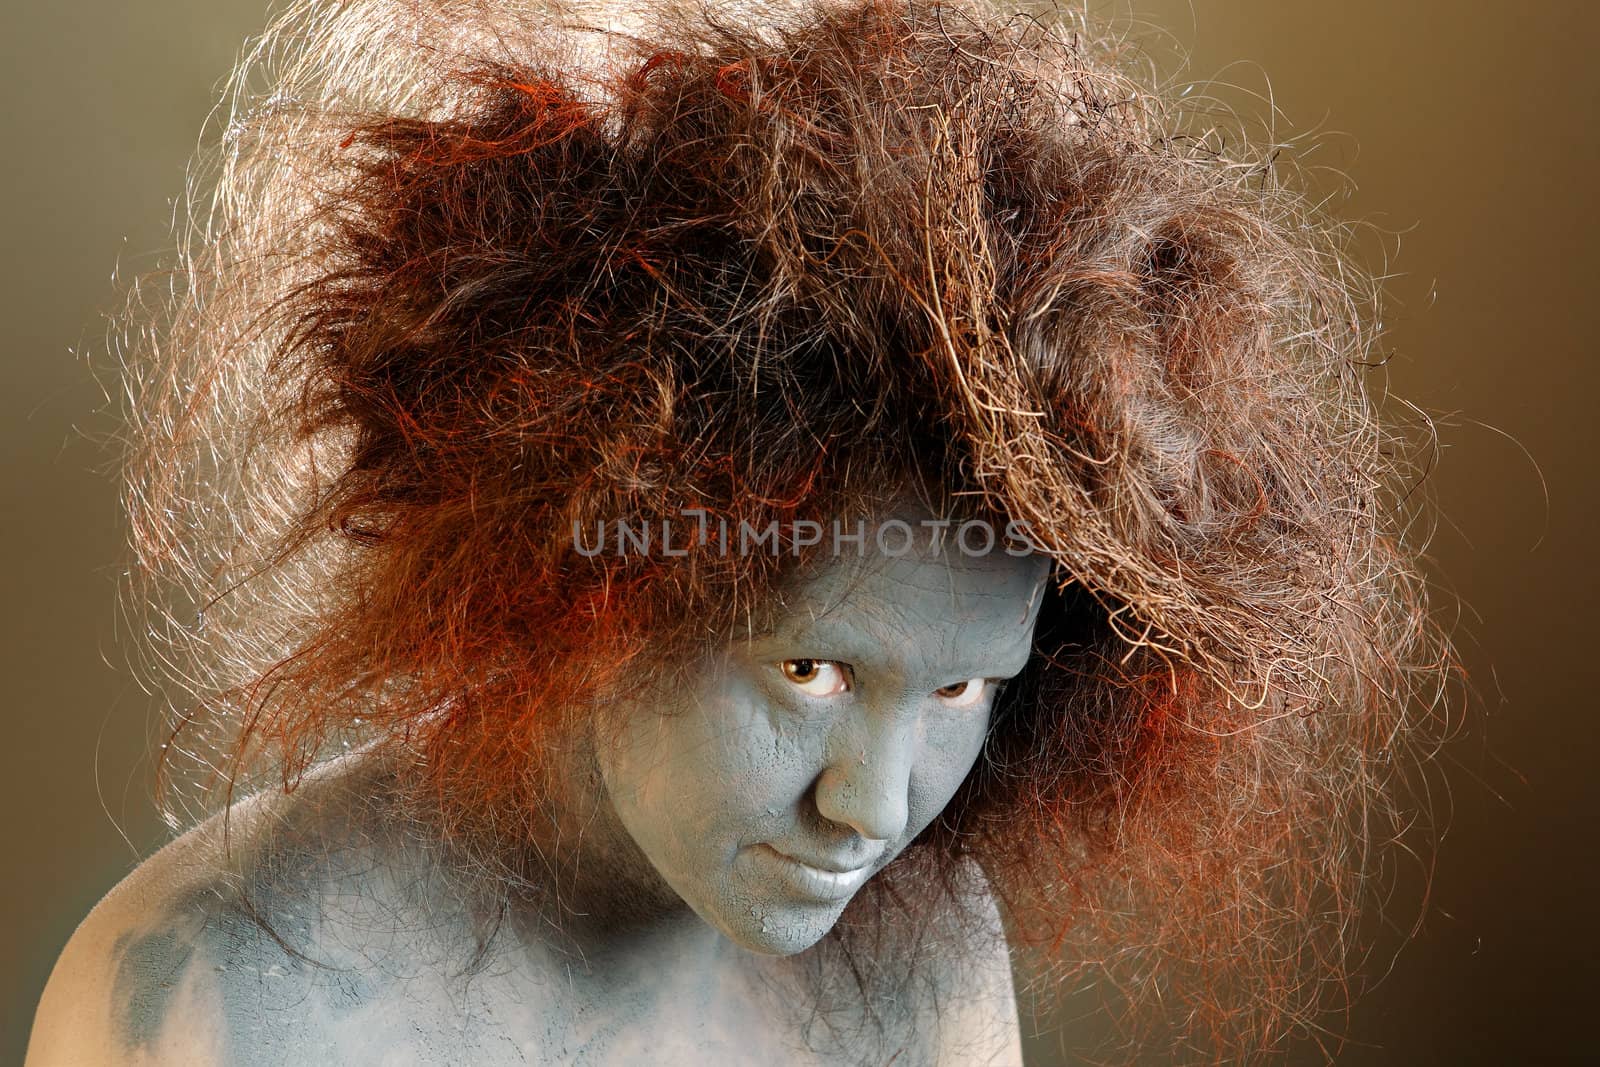 Woman with a nest in hair by pozitivstudija